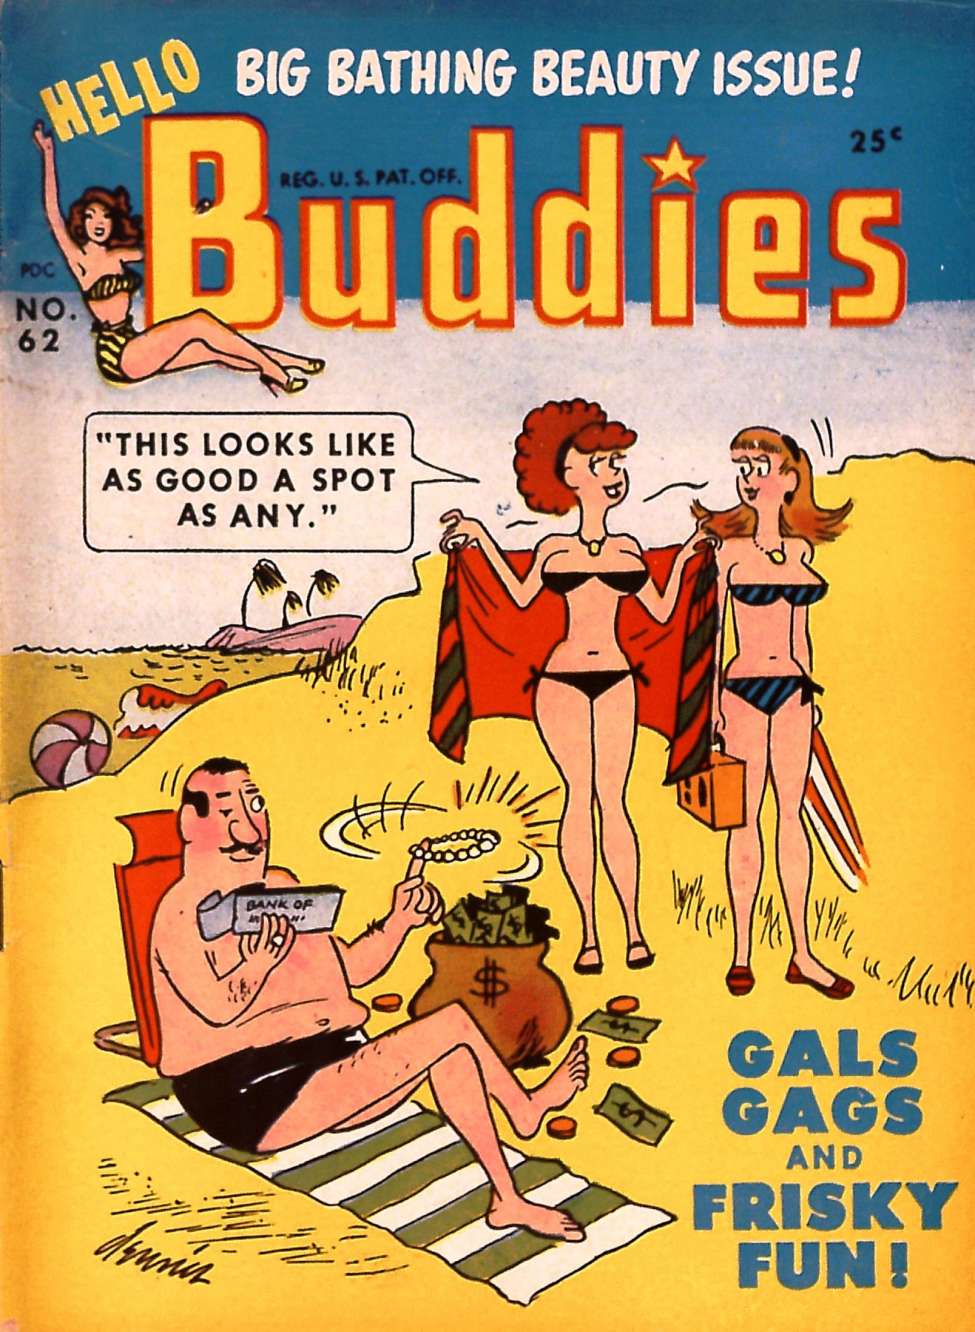 Book Cover For Hello Buddies 62